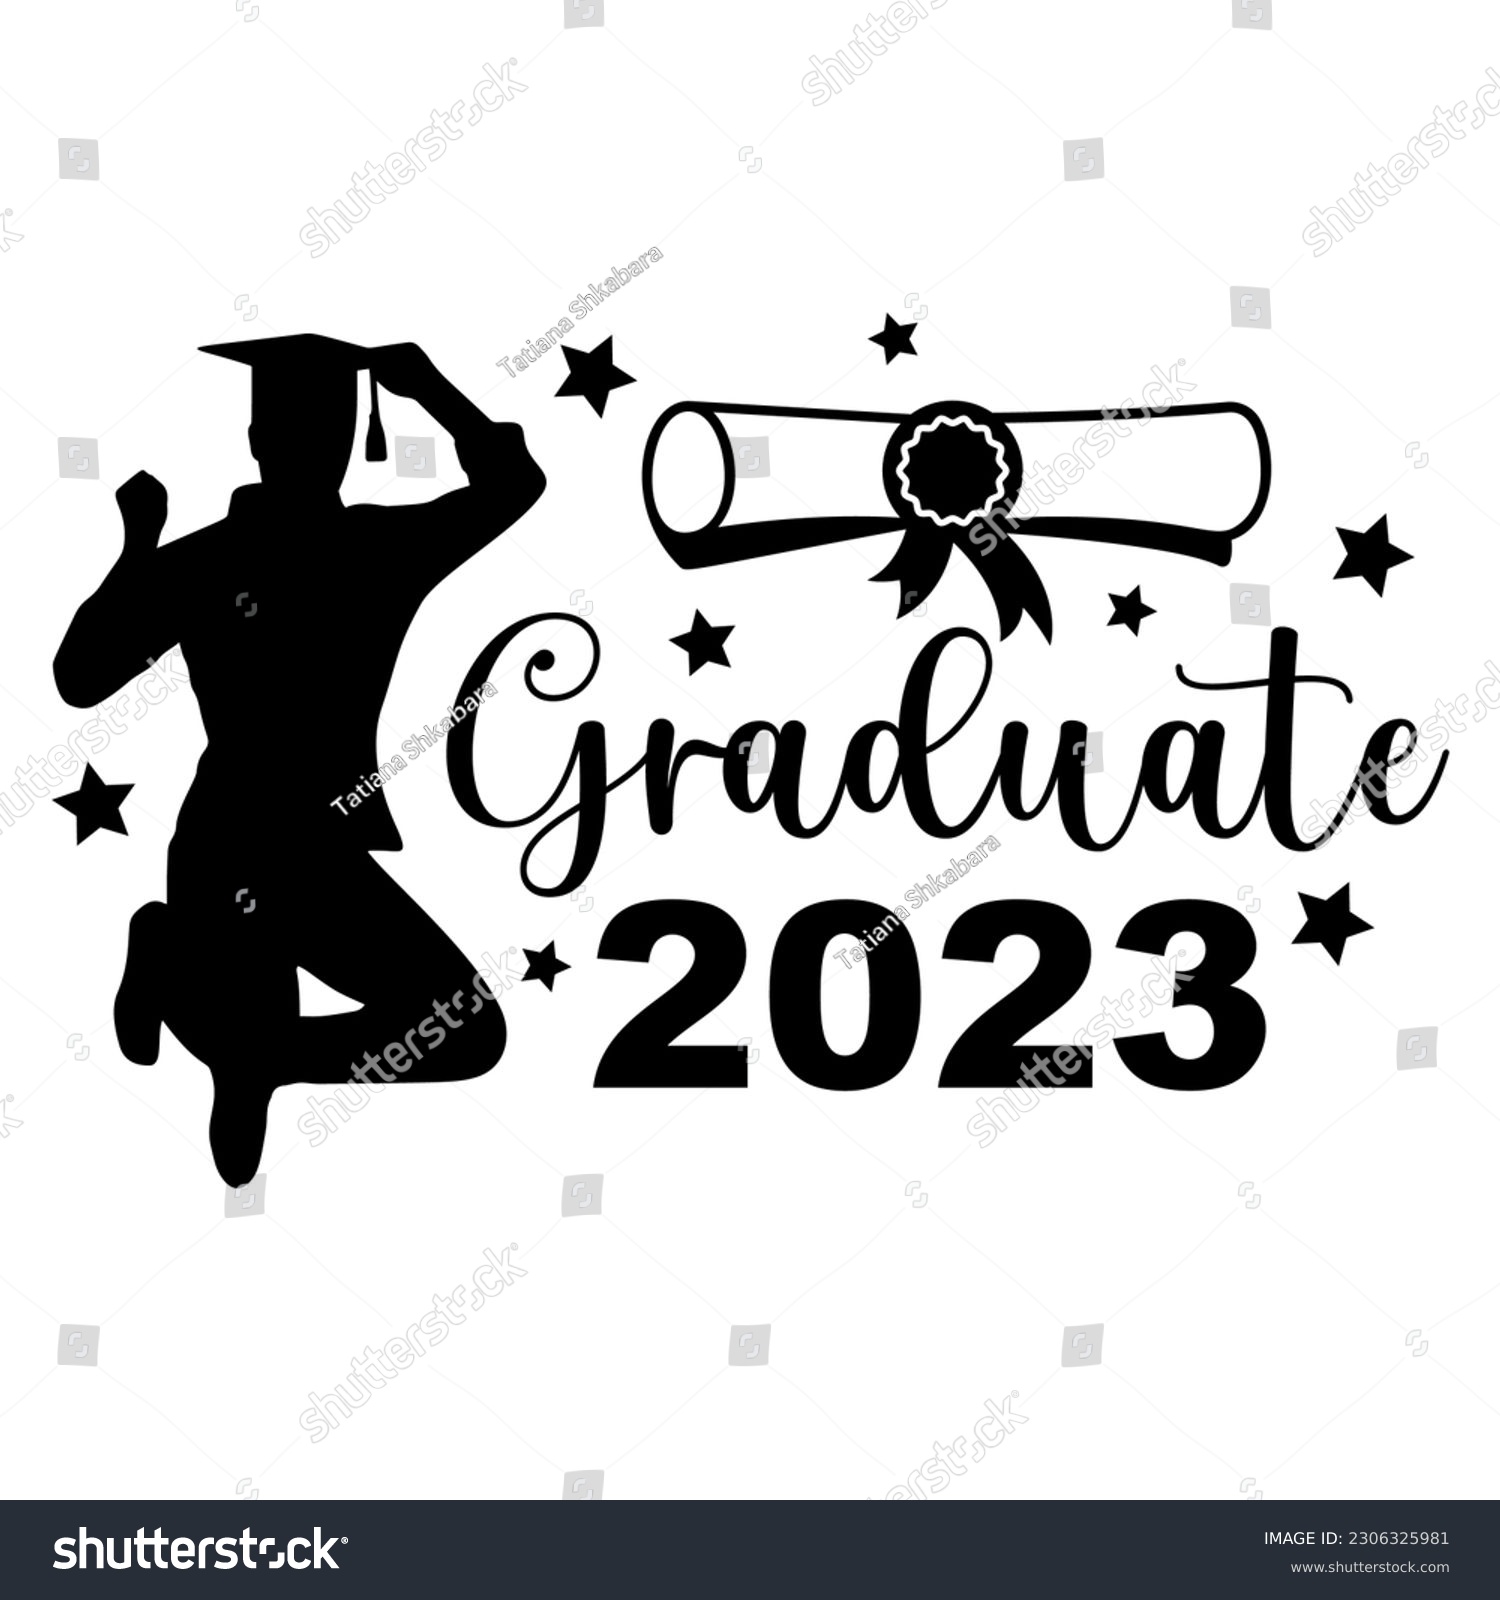 SVG of Graduate 2023. Black text isolated white background. Vector illustration of a graduating class of 2023. Graphics elements for t-shirts, and the idea for the sign. svg